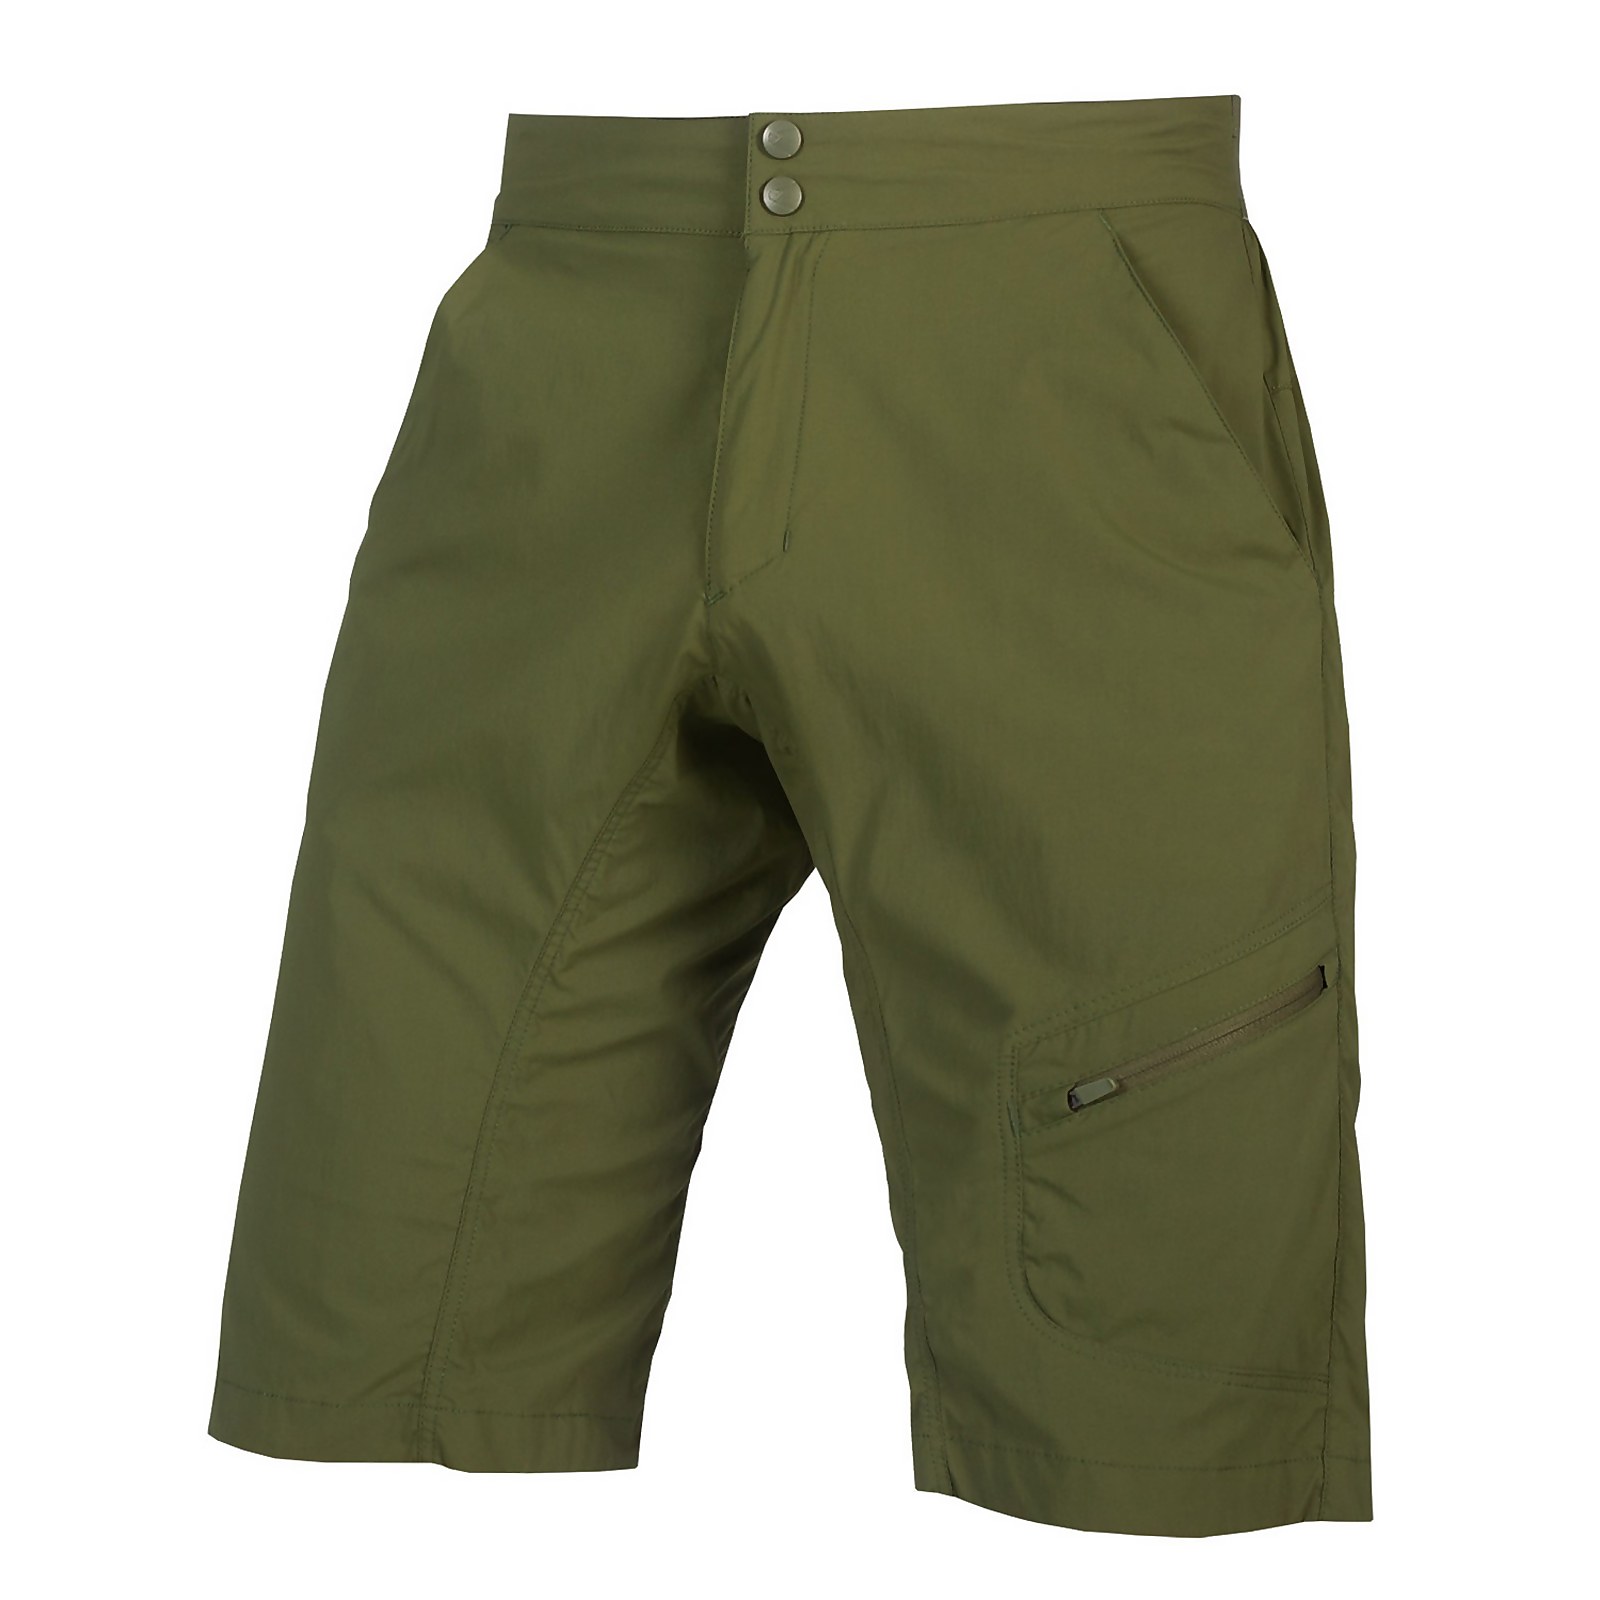 Hummvee Lite Short With Liner - Olive Green